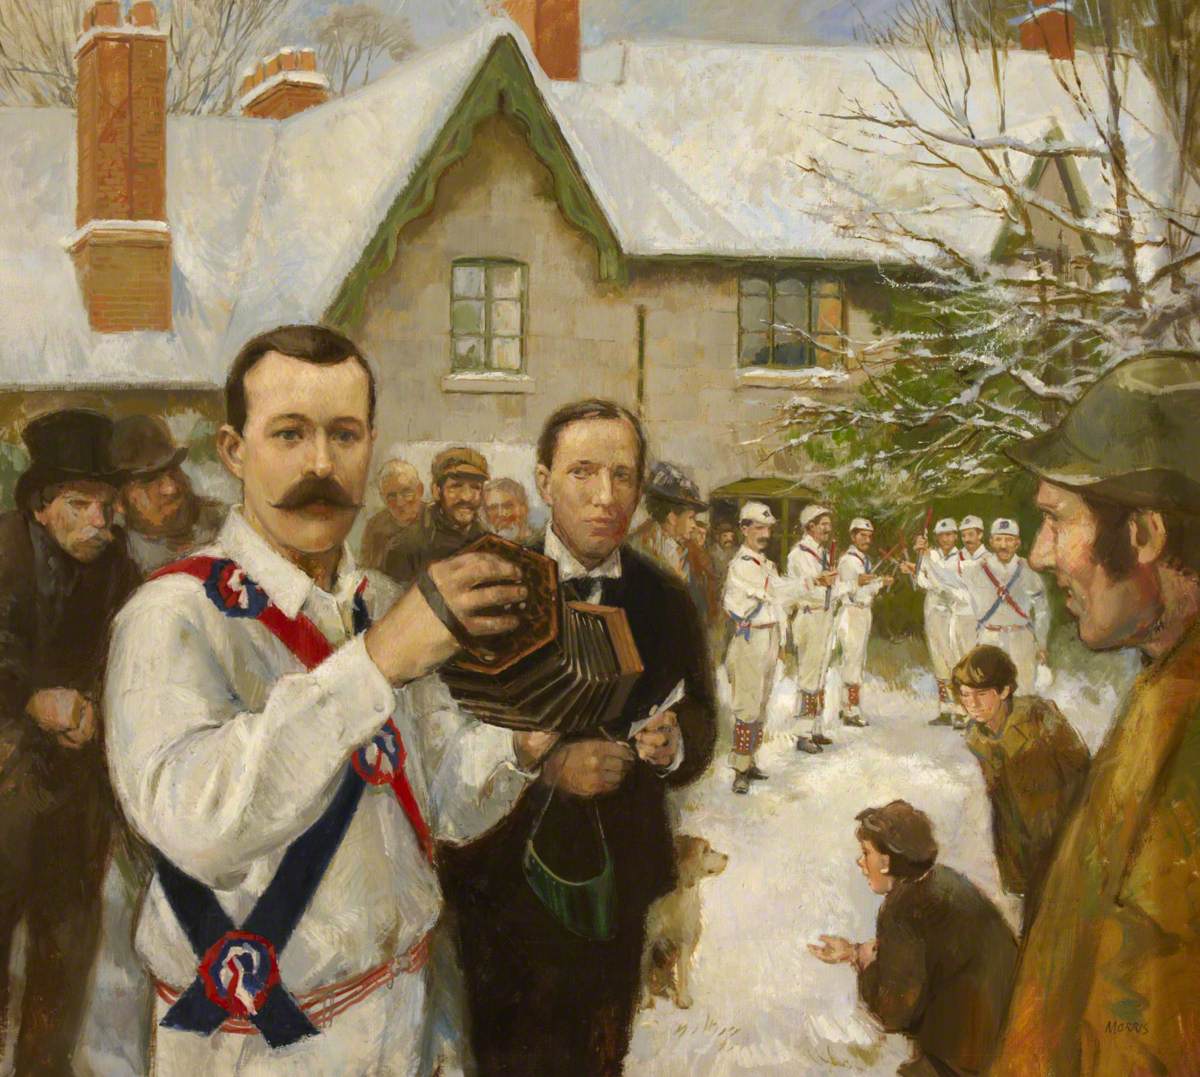 The Folklorist, Cecil Sharp, Meeting William Kimber in 1899. Painting by Anthony Morris.